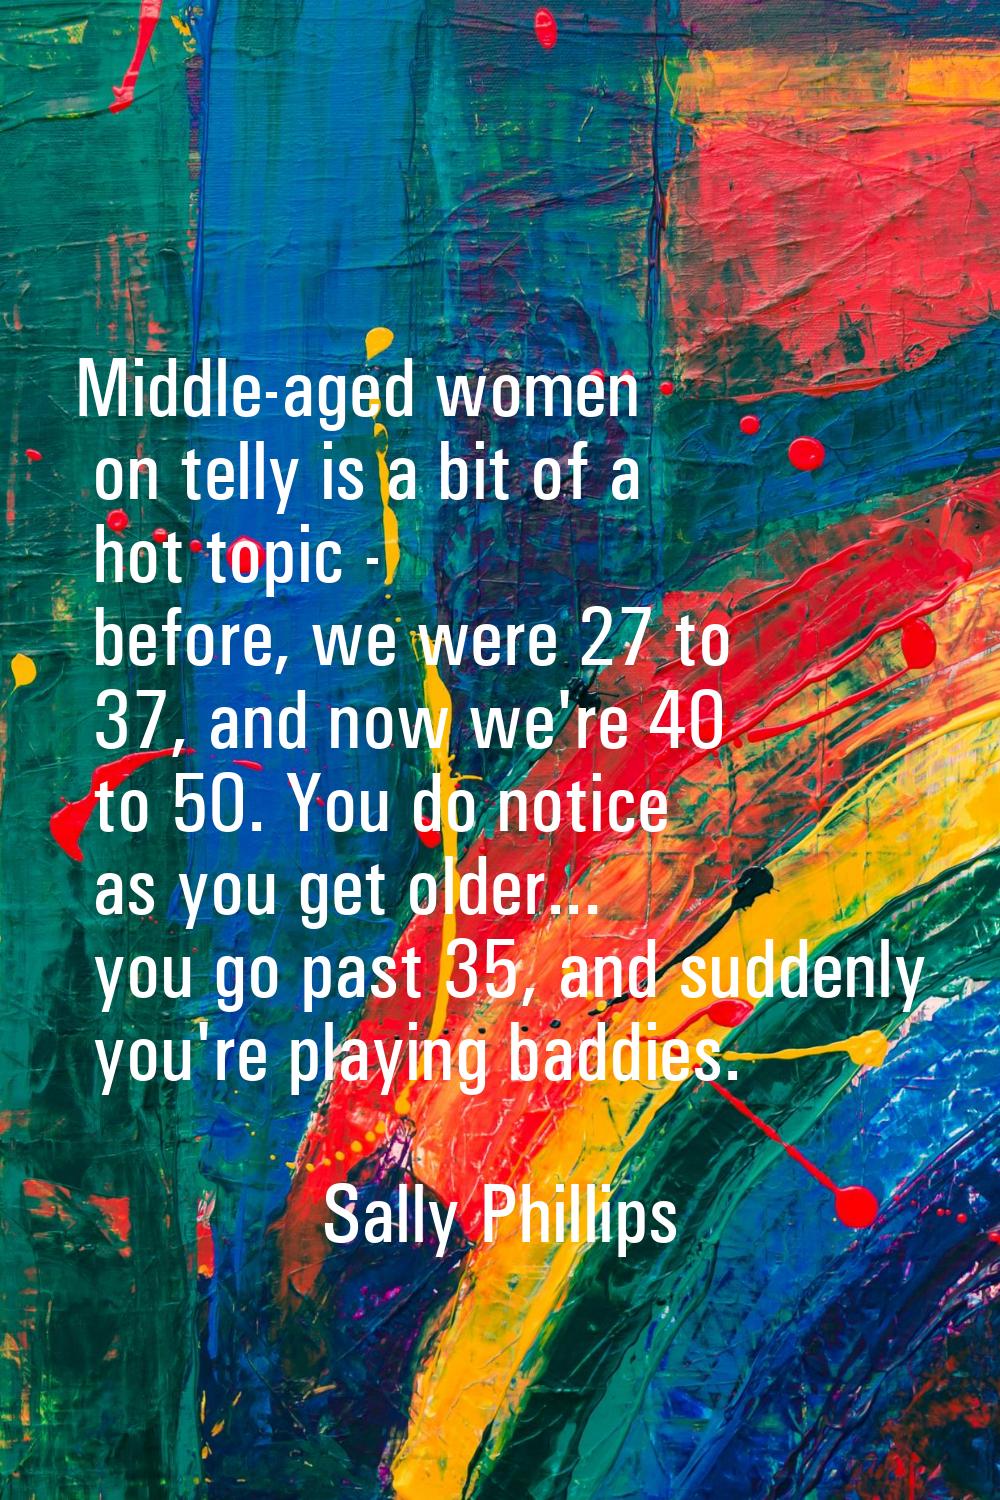 Middle-aged women on telly is a bit of a hot topic - before, we were 27 to 37, and now we're 40 to 